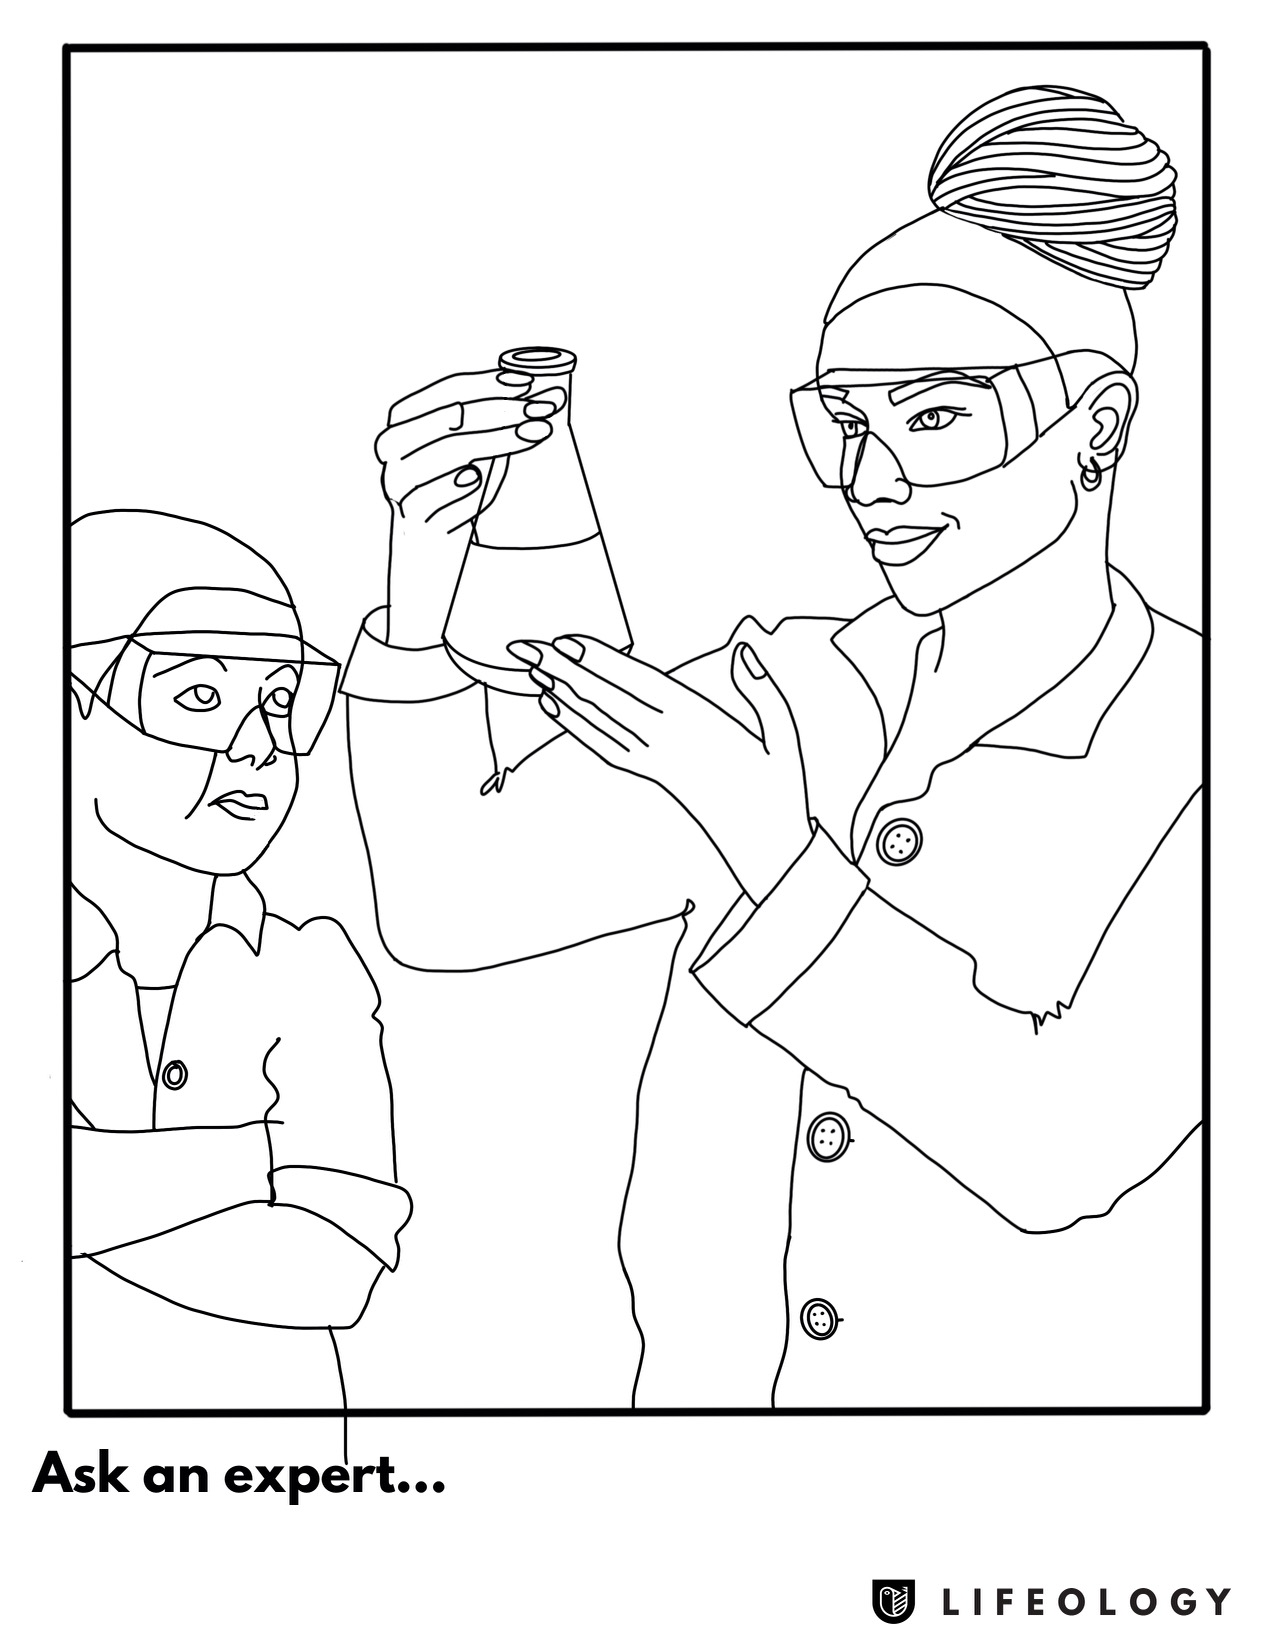 A coloring sheet showing a female scientist with a flask and a young boy observing her.